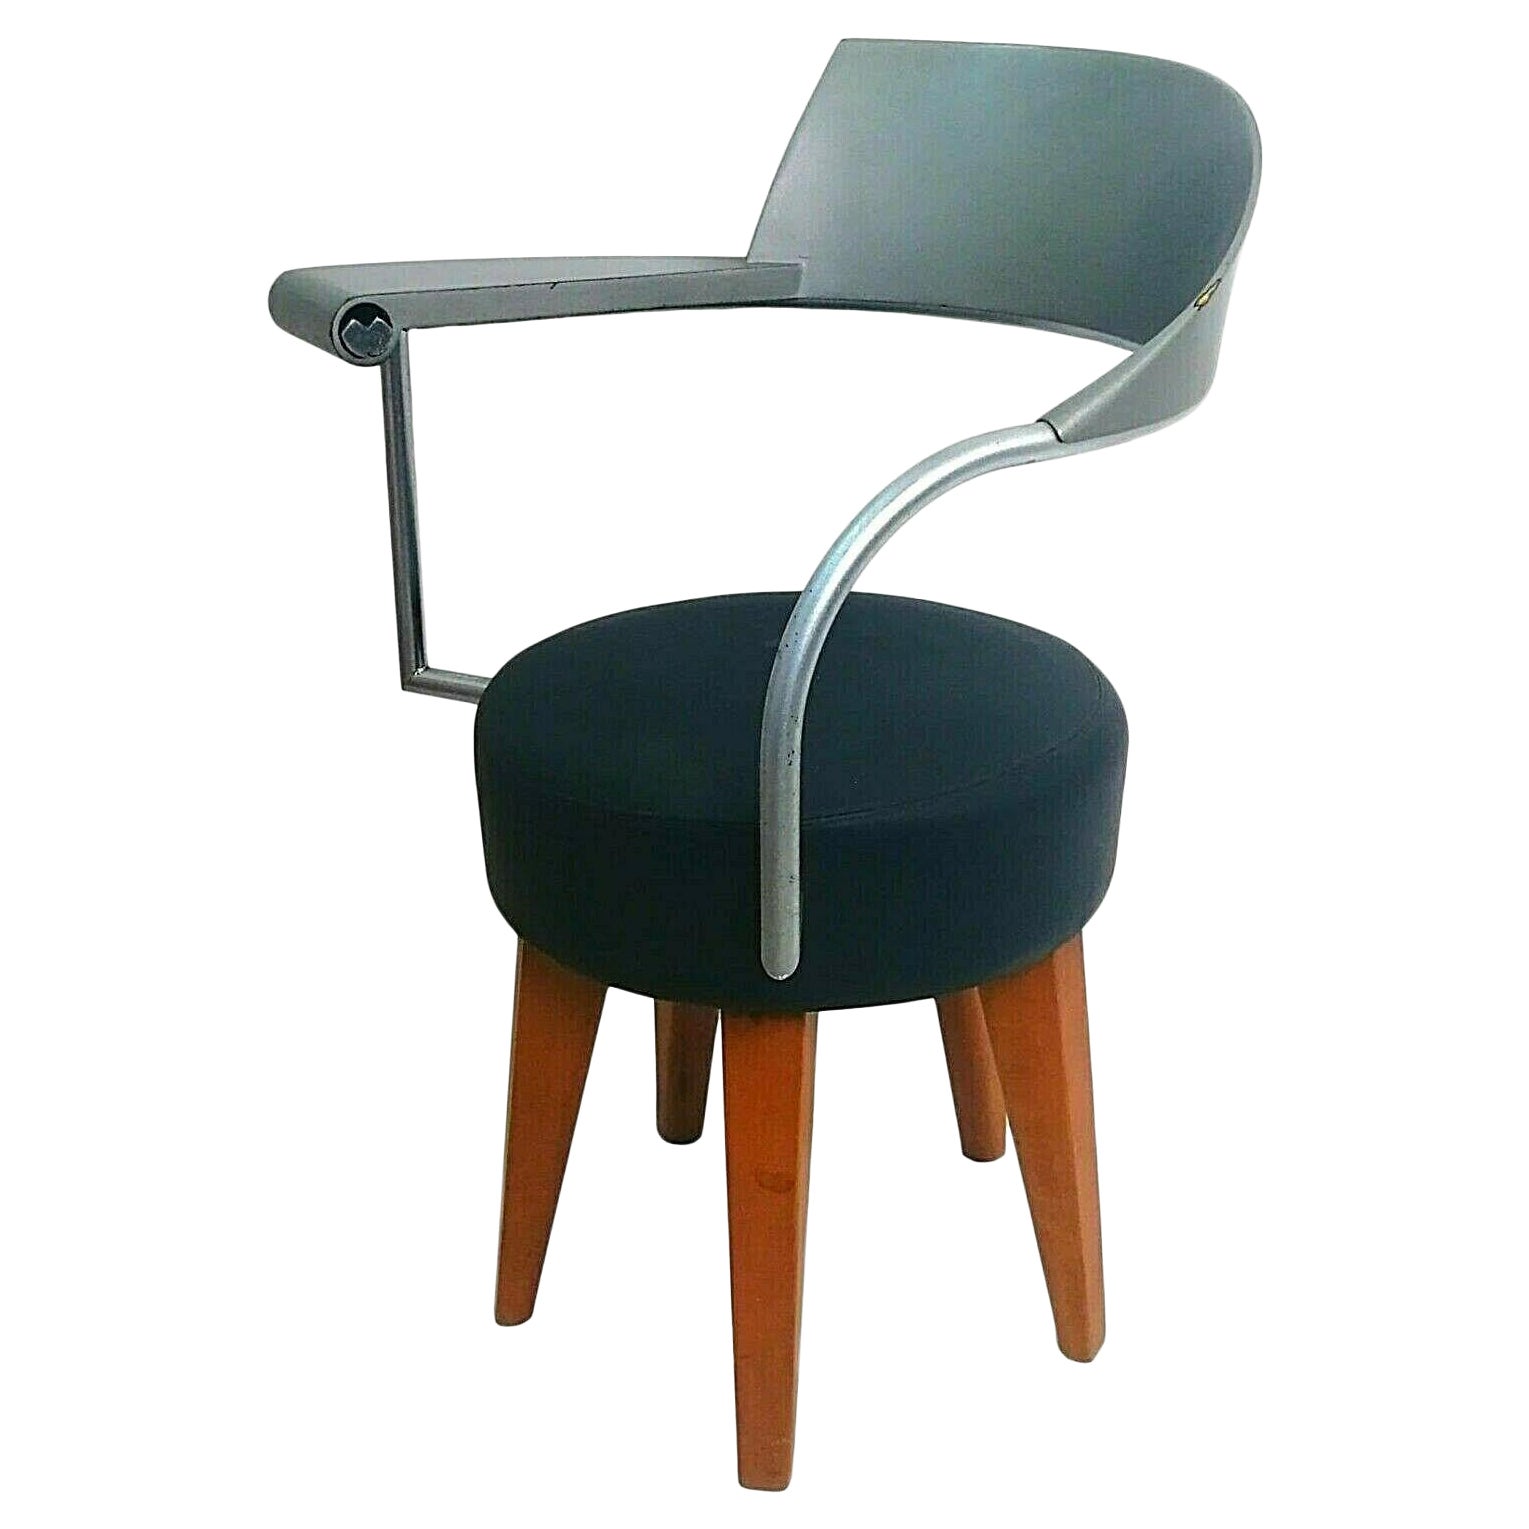 Chair Armchair "Techno" Design Philippe Starck For L'Oreal by Maletti, 1980s For Sale